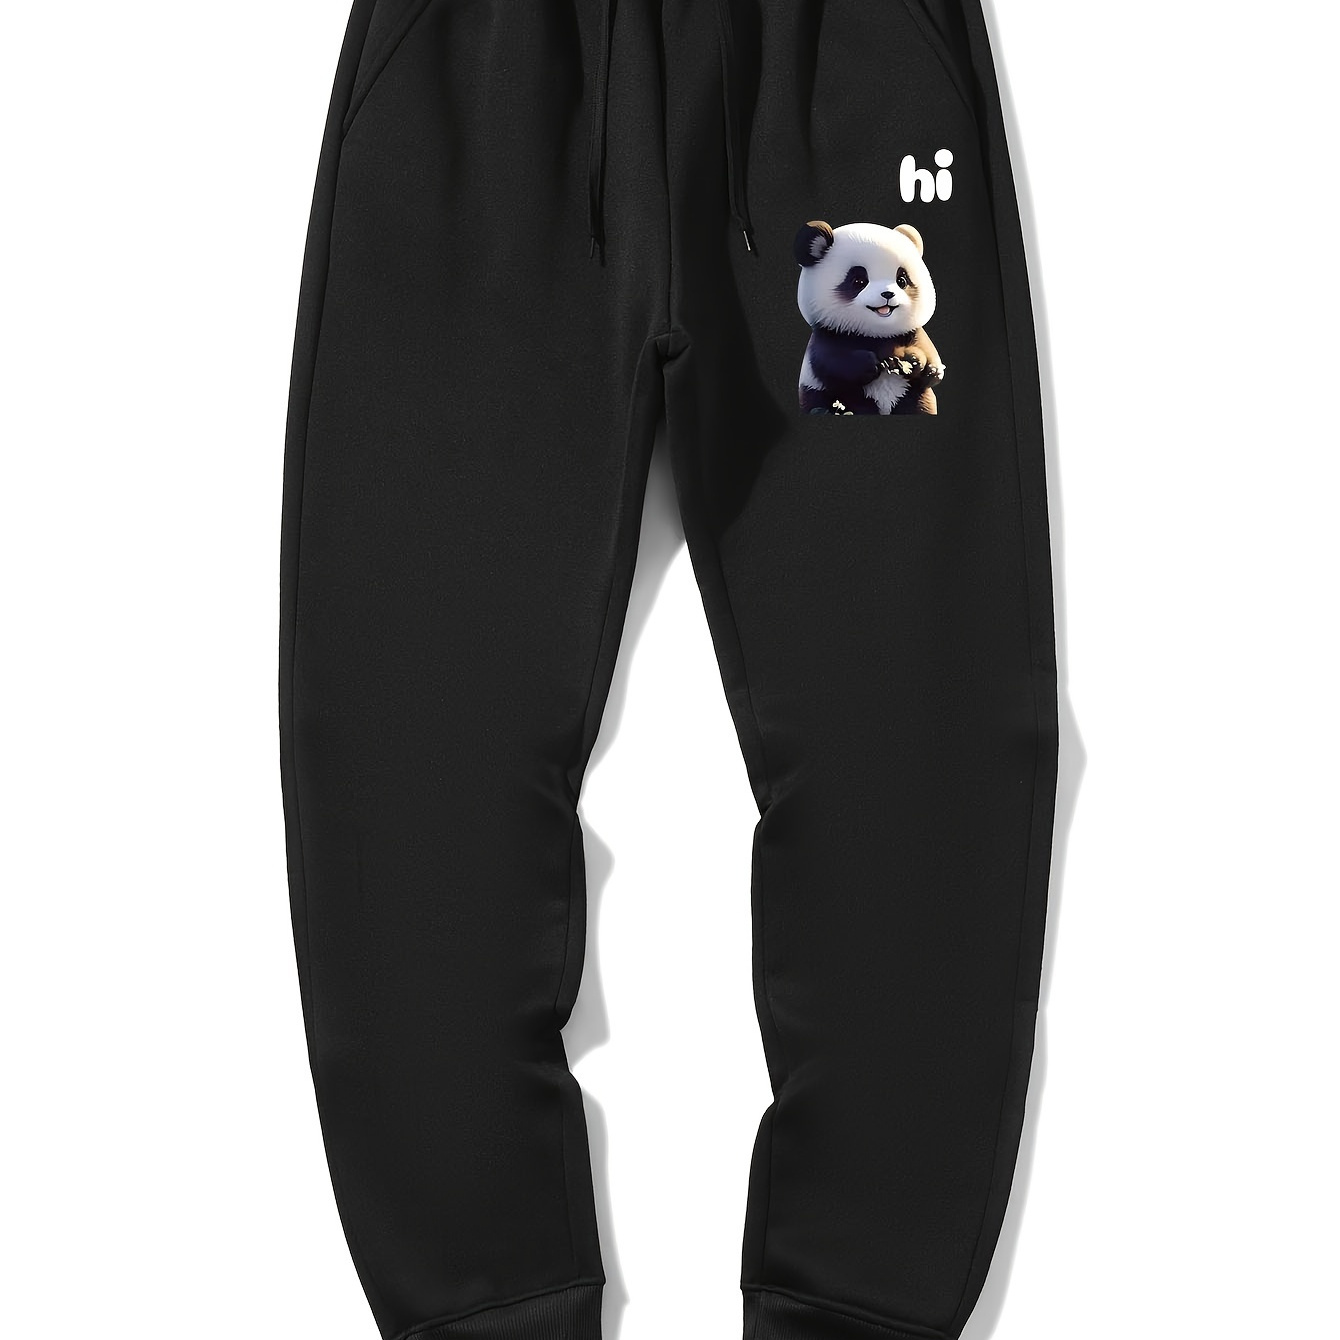 

Fashionable Men's Cute Panda Print Drawstring Casual Sports Loose Trousers, Suitable For Outdoor Sports, Comfortable And Versatile